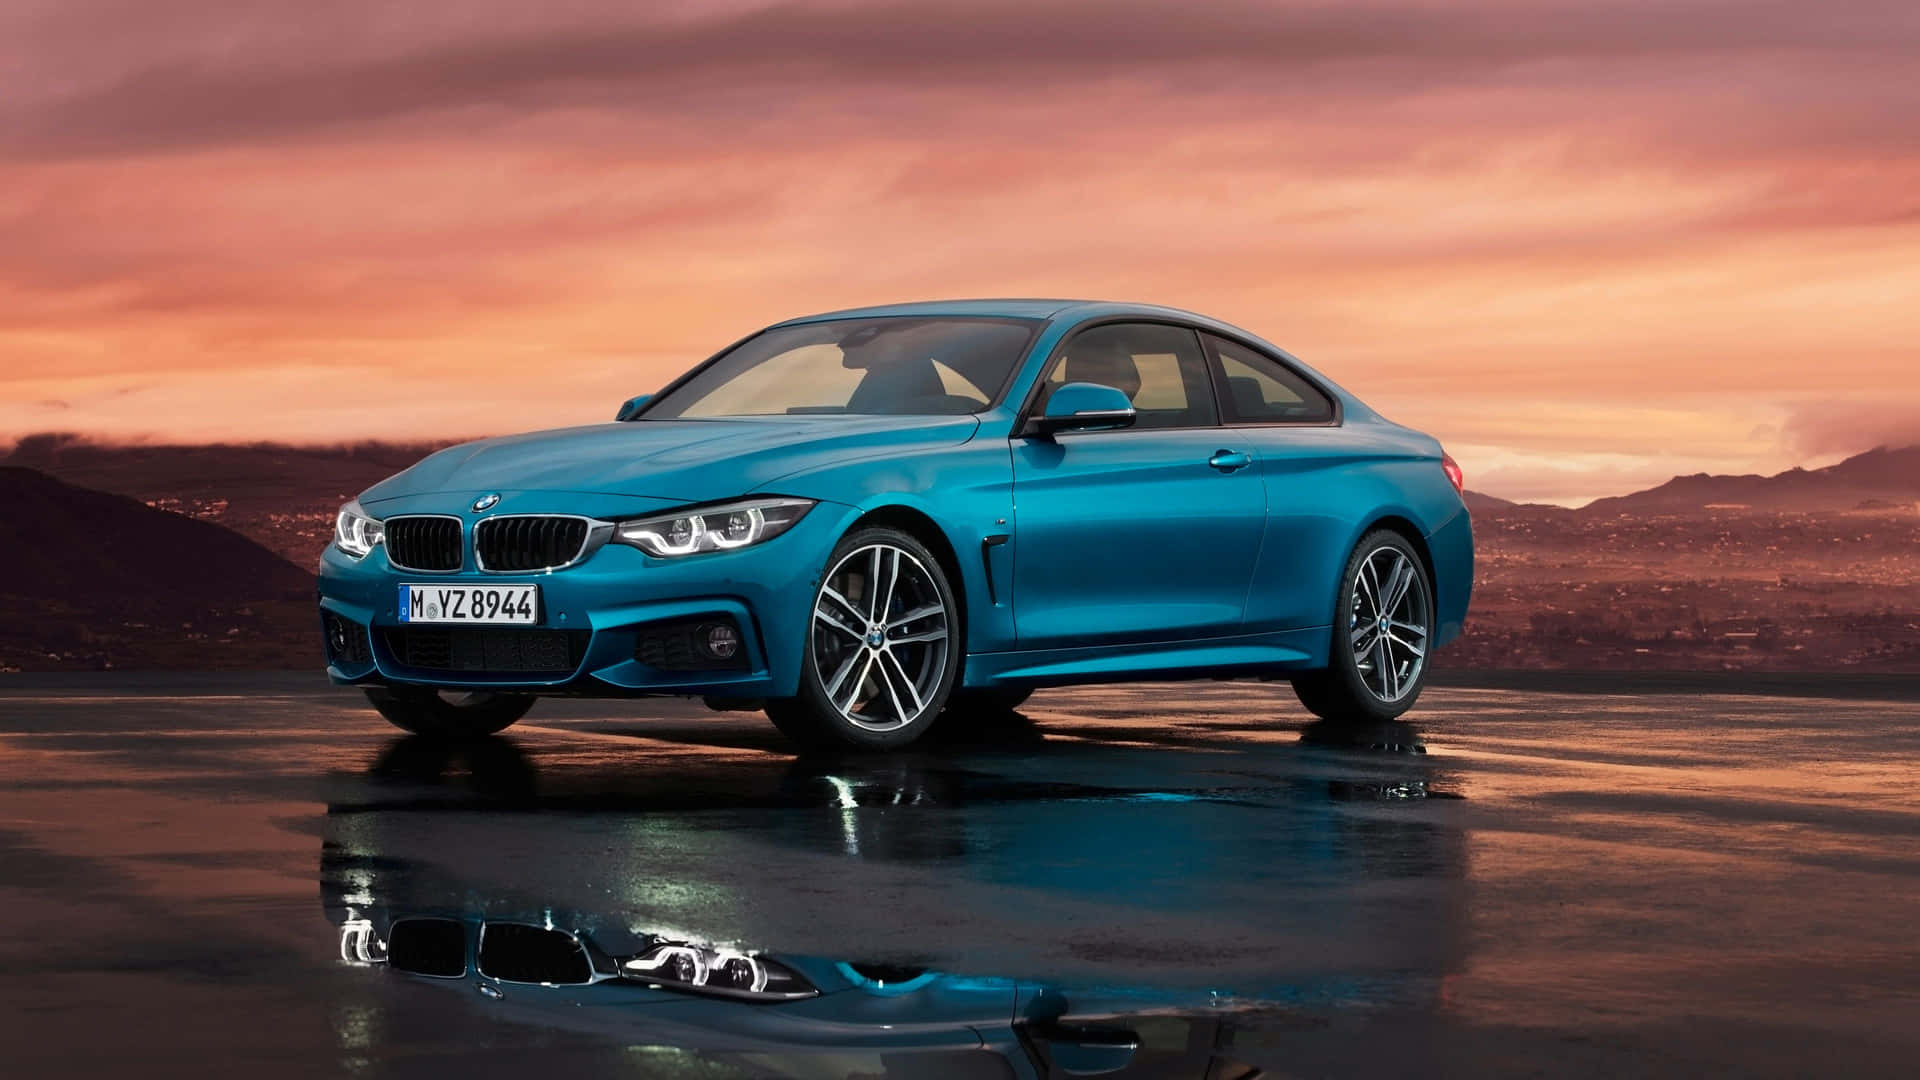 Elegance and power, the BMW 440i is a force to be reckoned with. Wallpaper